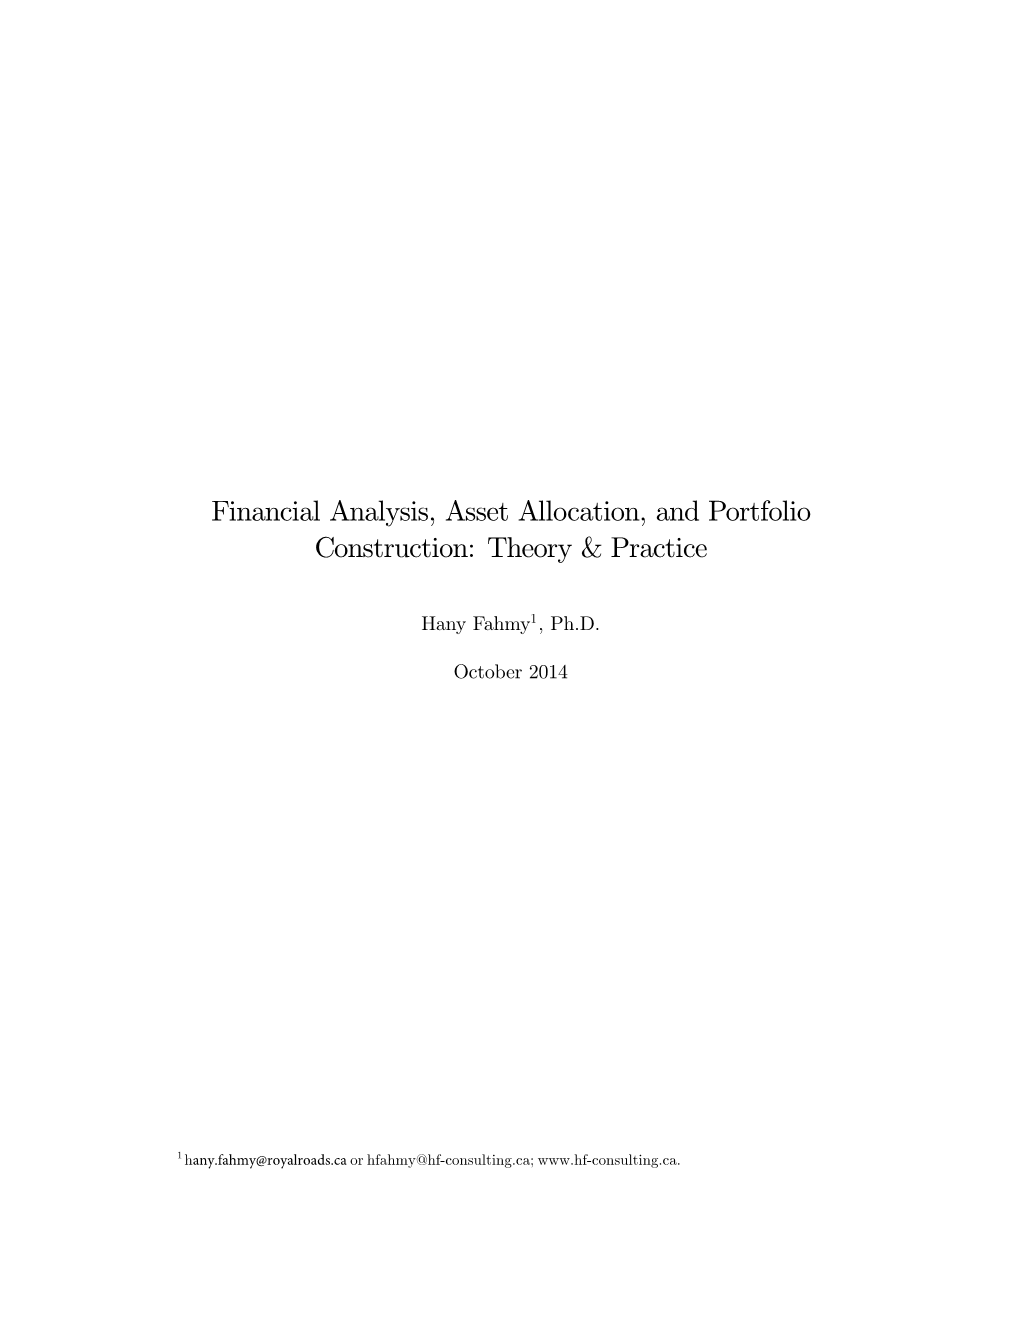 Financial Analysis, Asset Allocation, and Portfolio Construction: Theory & Practice